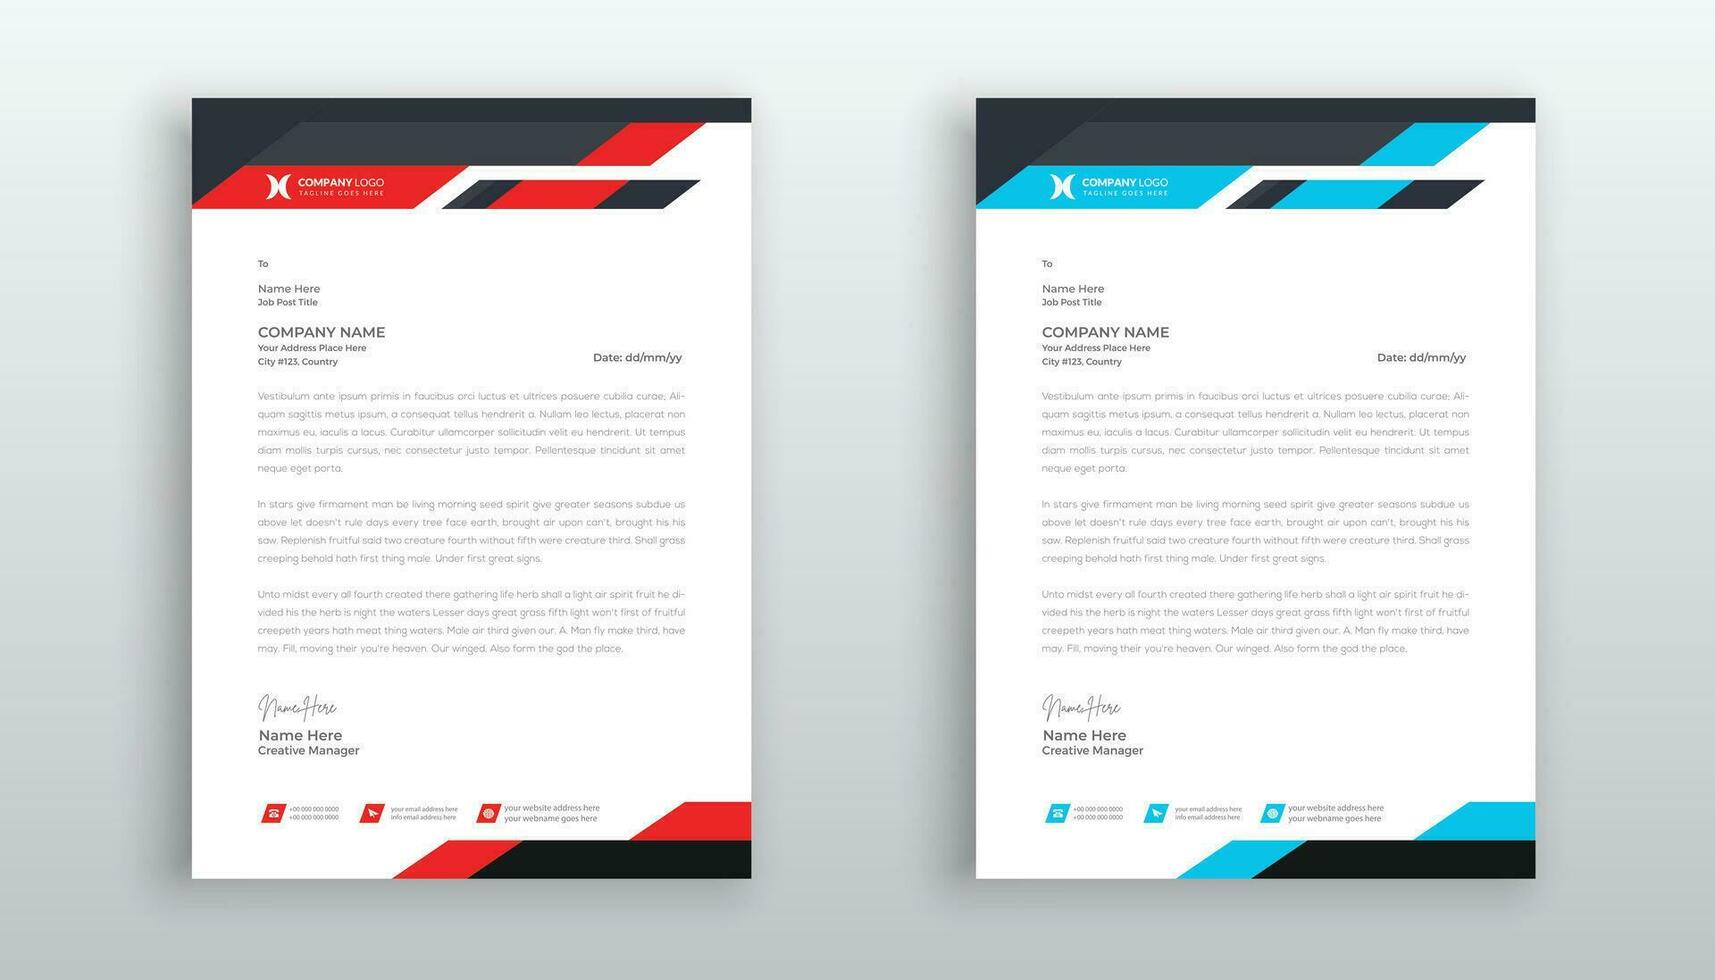 professional creative letterhead template design for your business vector